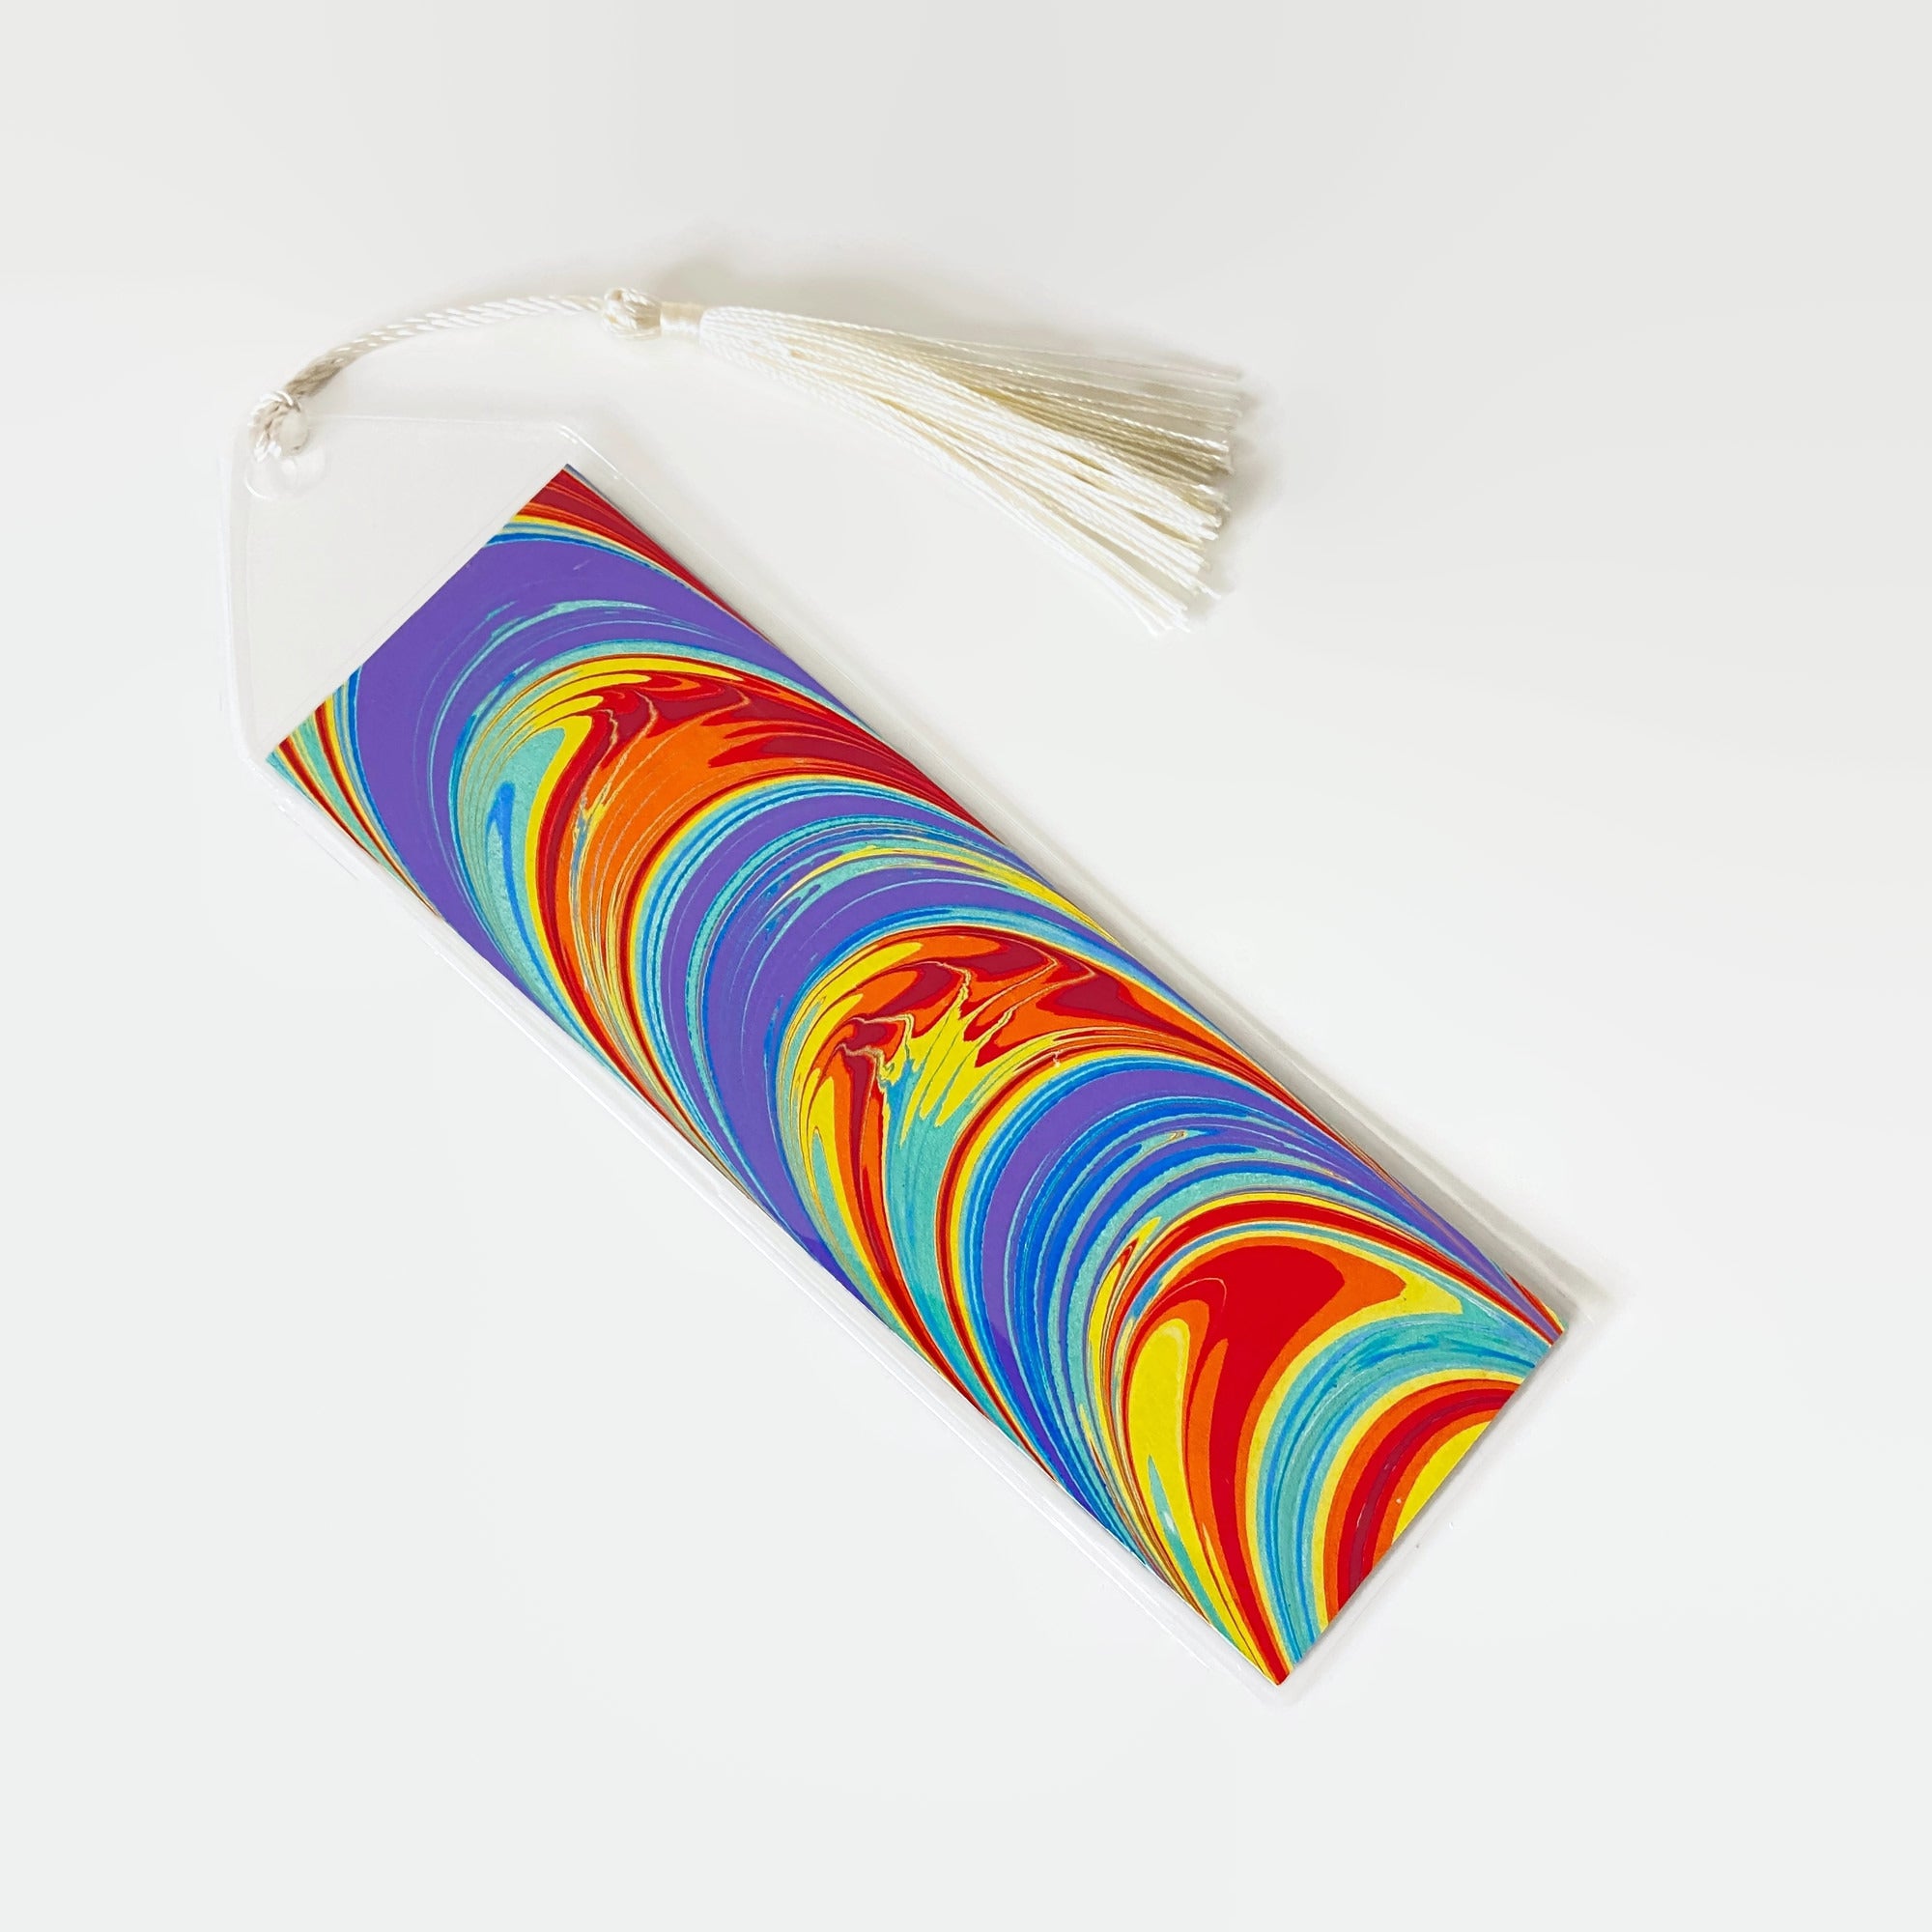 Bookmark with Hand Marbled Paper, Rainbow Arches with Spikes